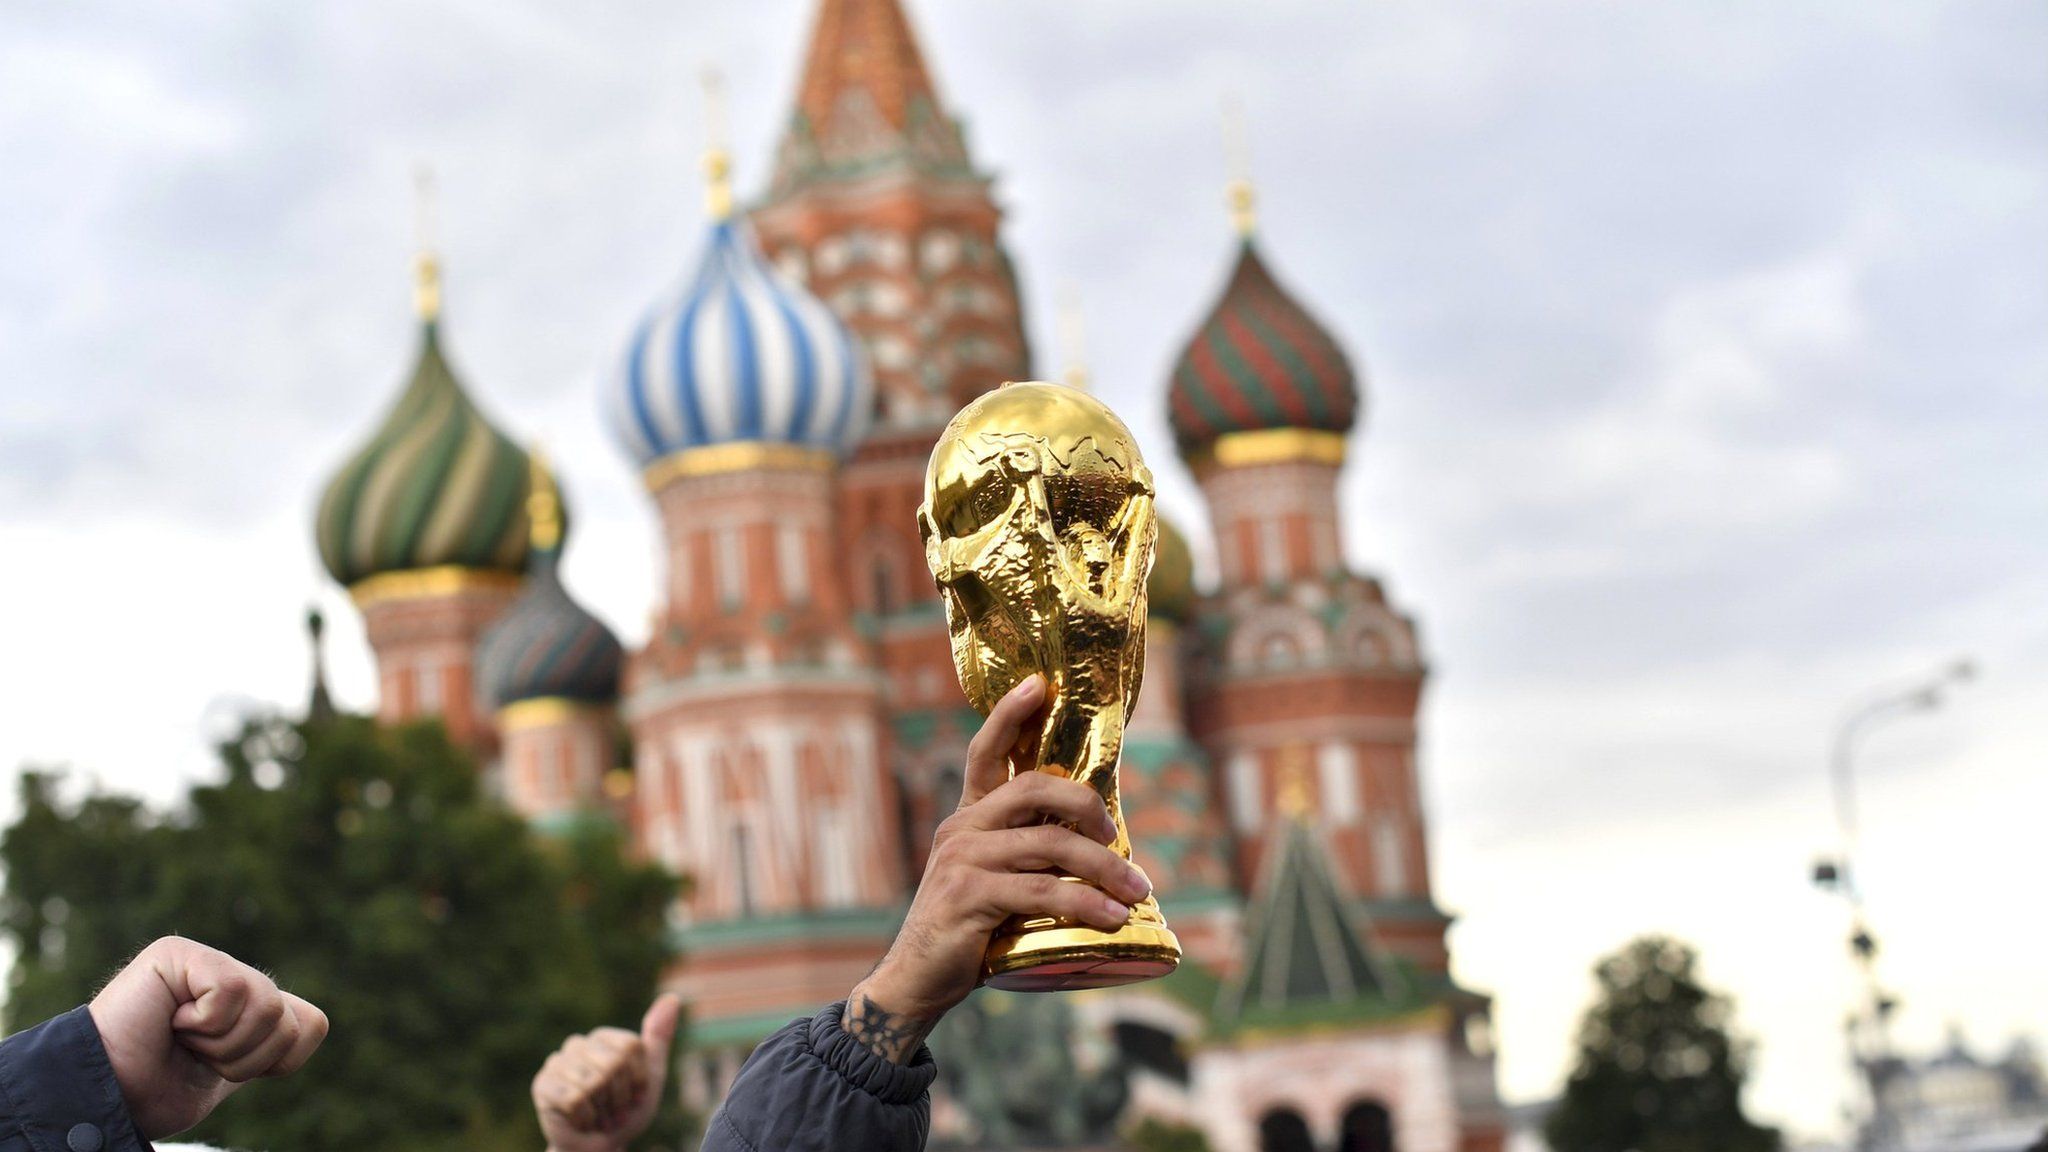 Colombian fans hold a fake World Cup trophy in front of Saint Basil's Cathedral in Red Square, Moscow